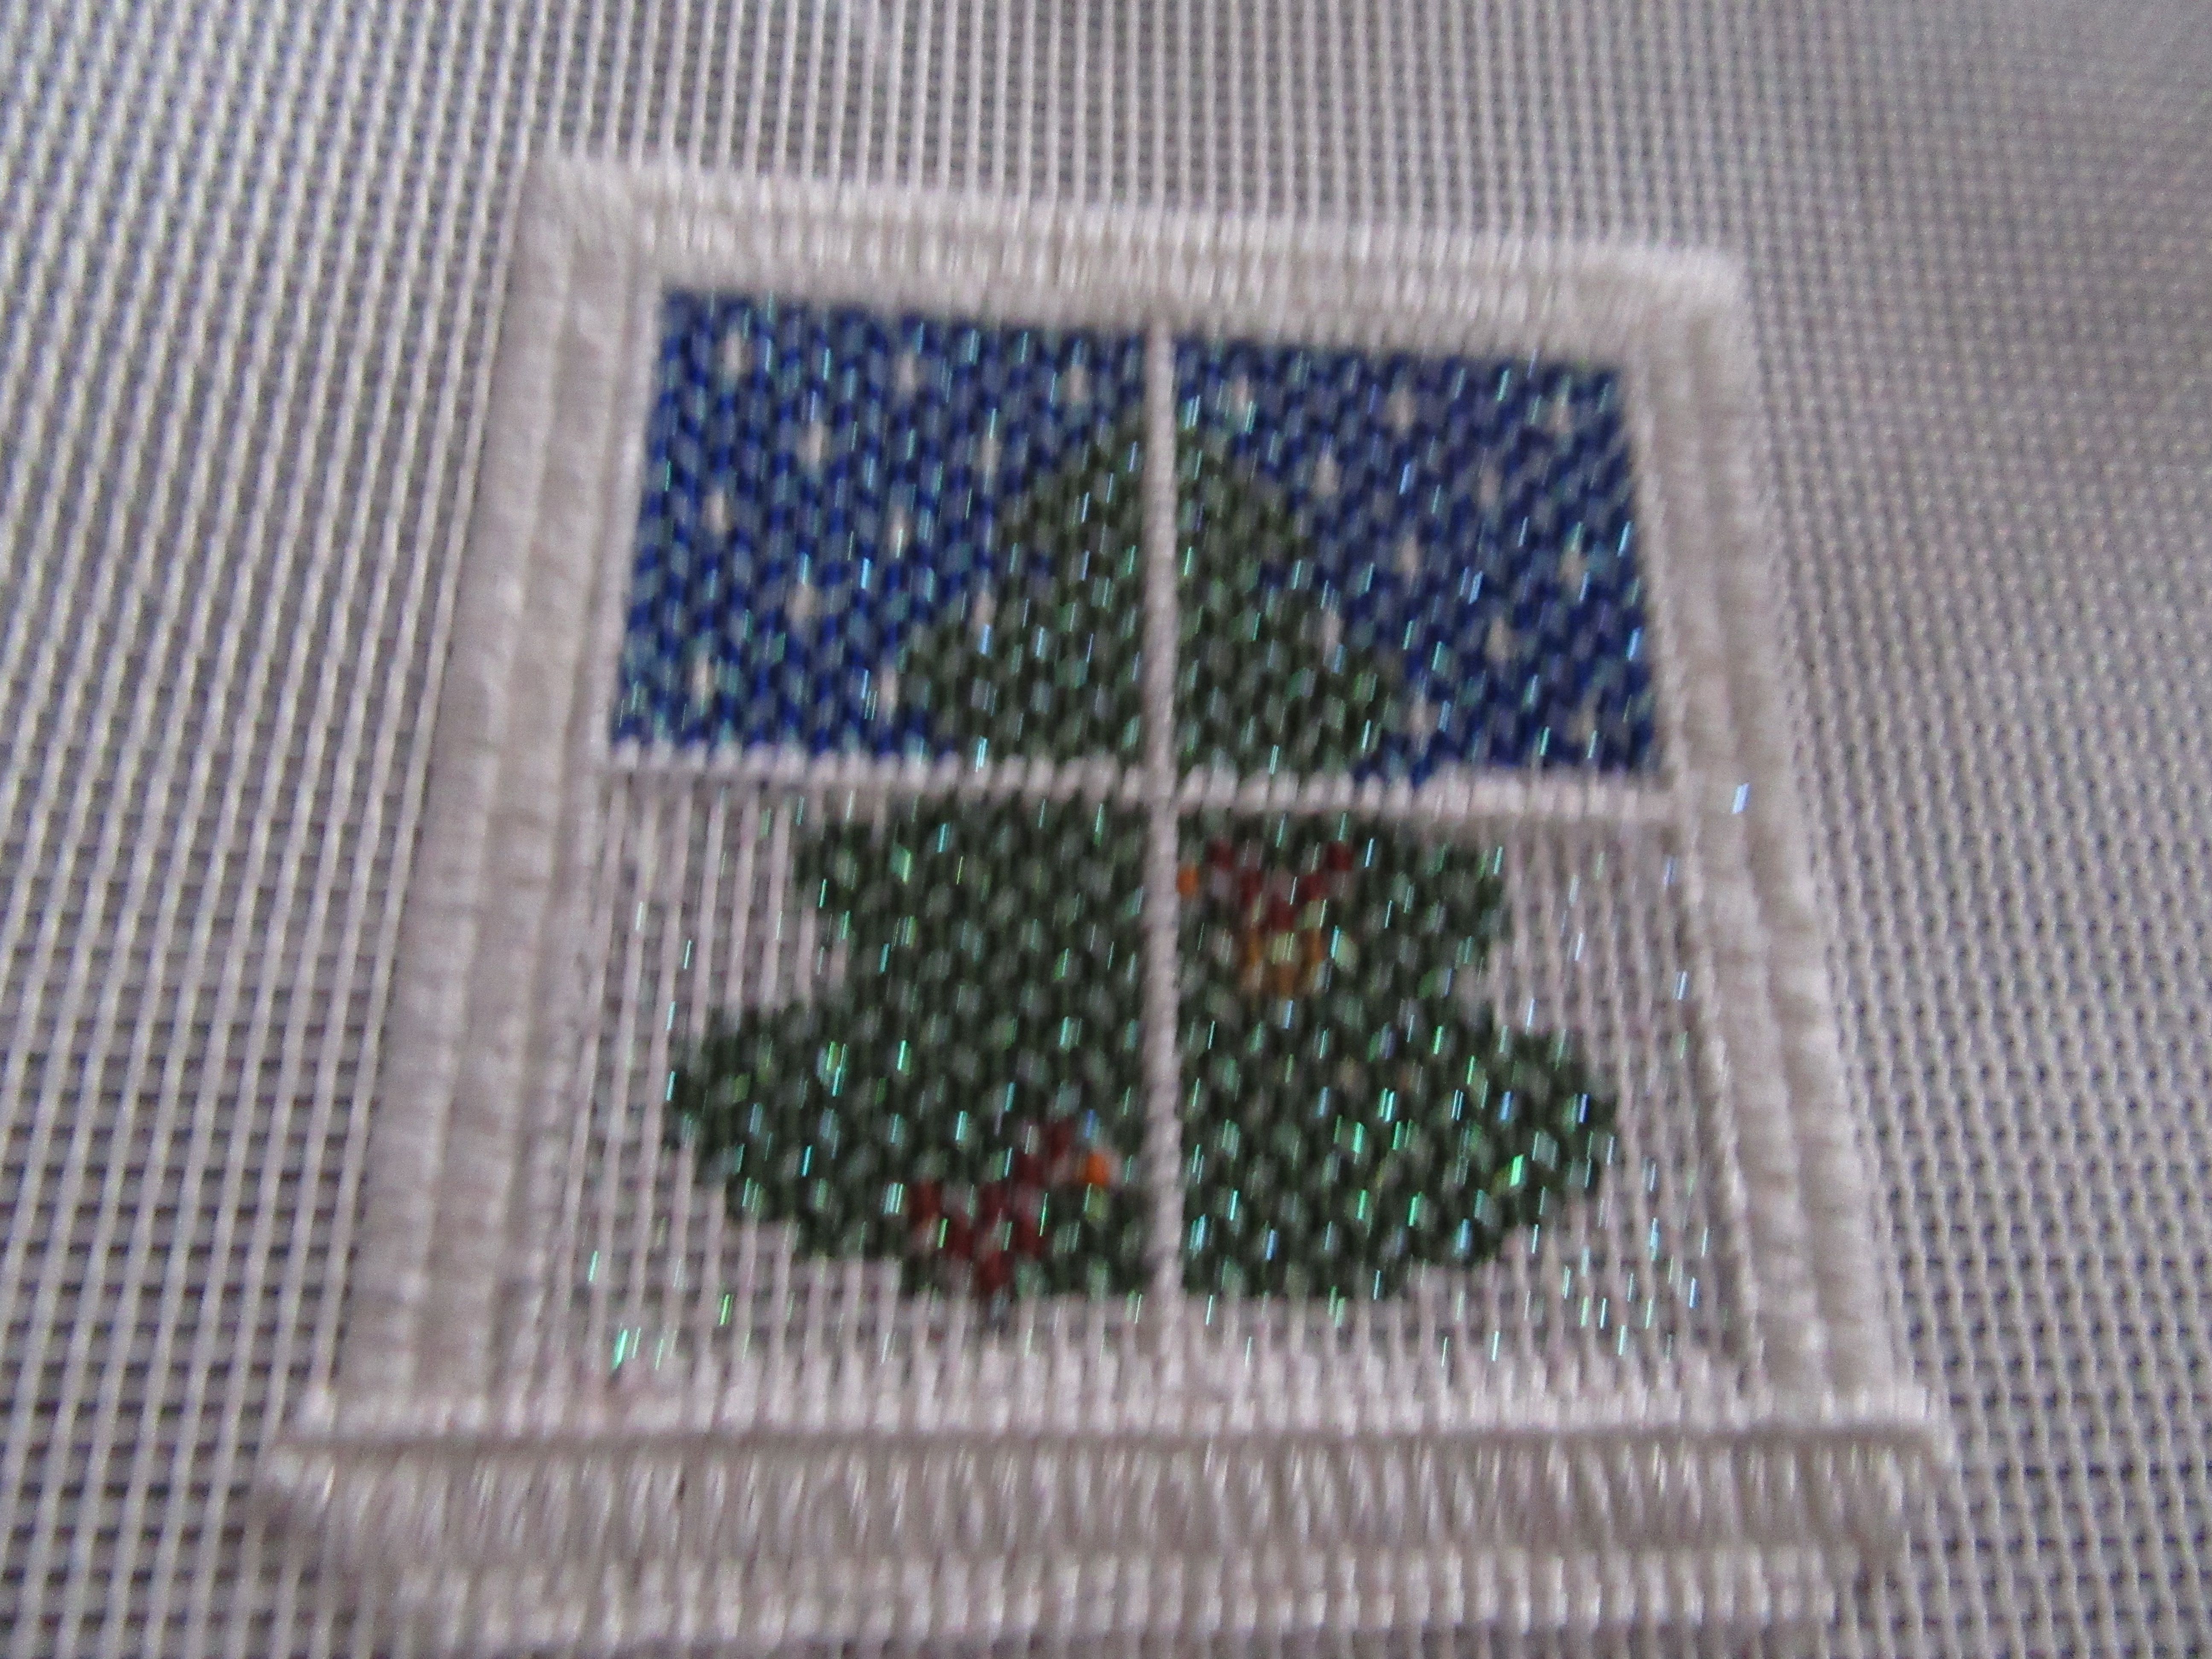 Bead Embroidery Stitch Samples - Nuts about Needlepoint